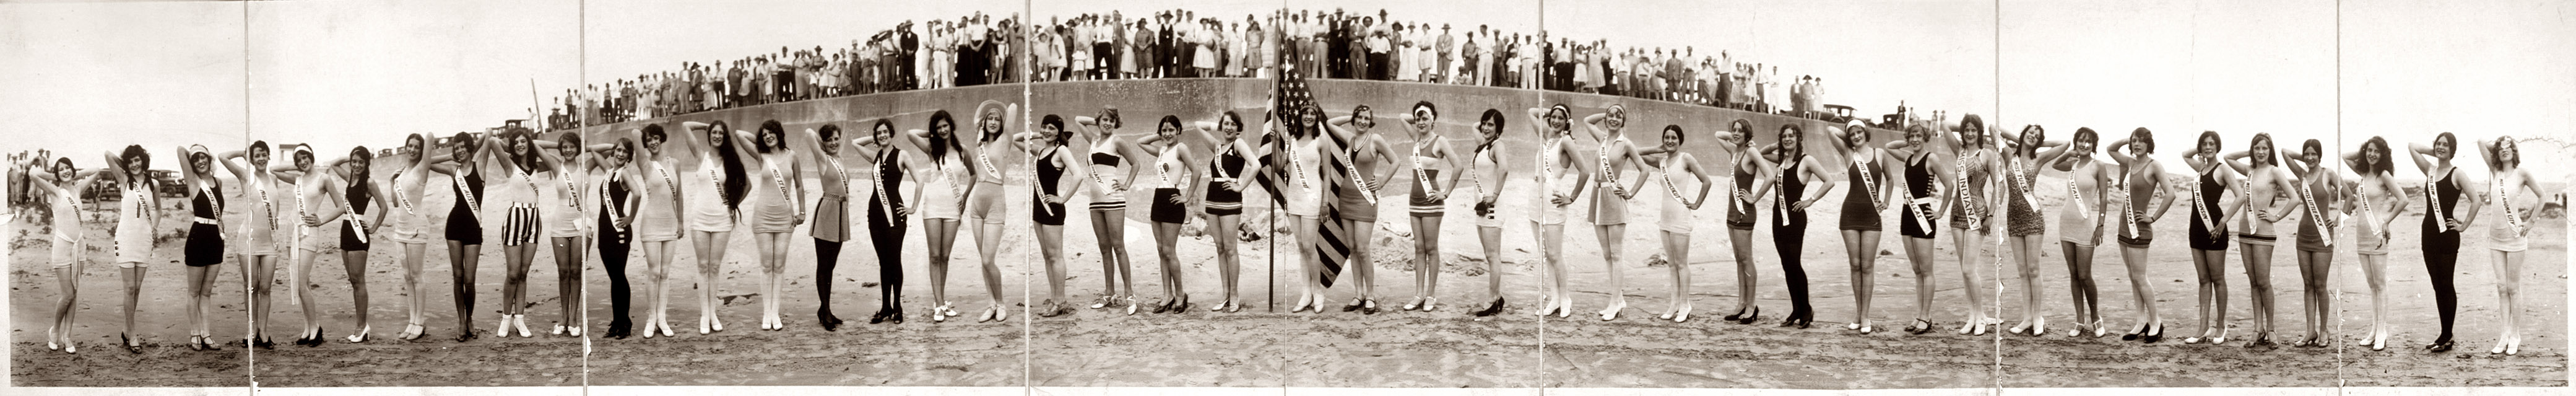 Third International Pageant of Pulchritude and Ninth Annual Bathing Girl Revue, June 1928. Galveston, Texas. View full size.